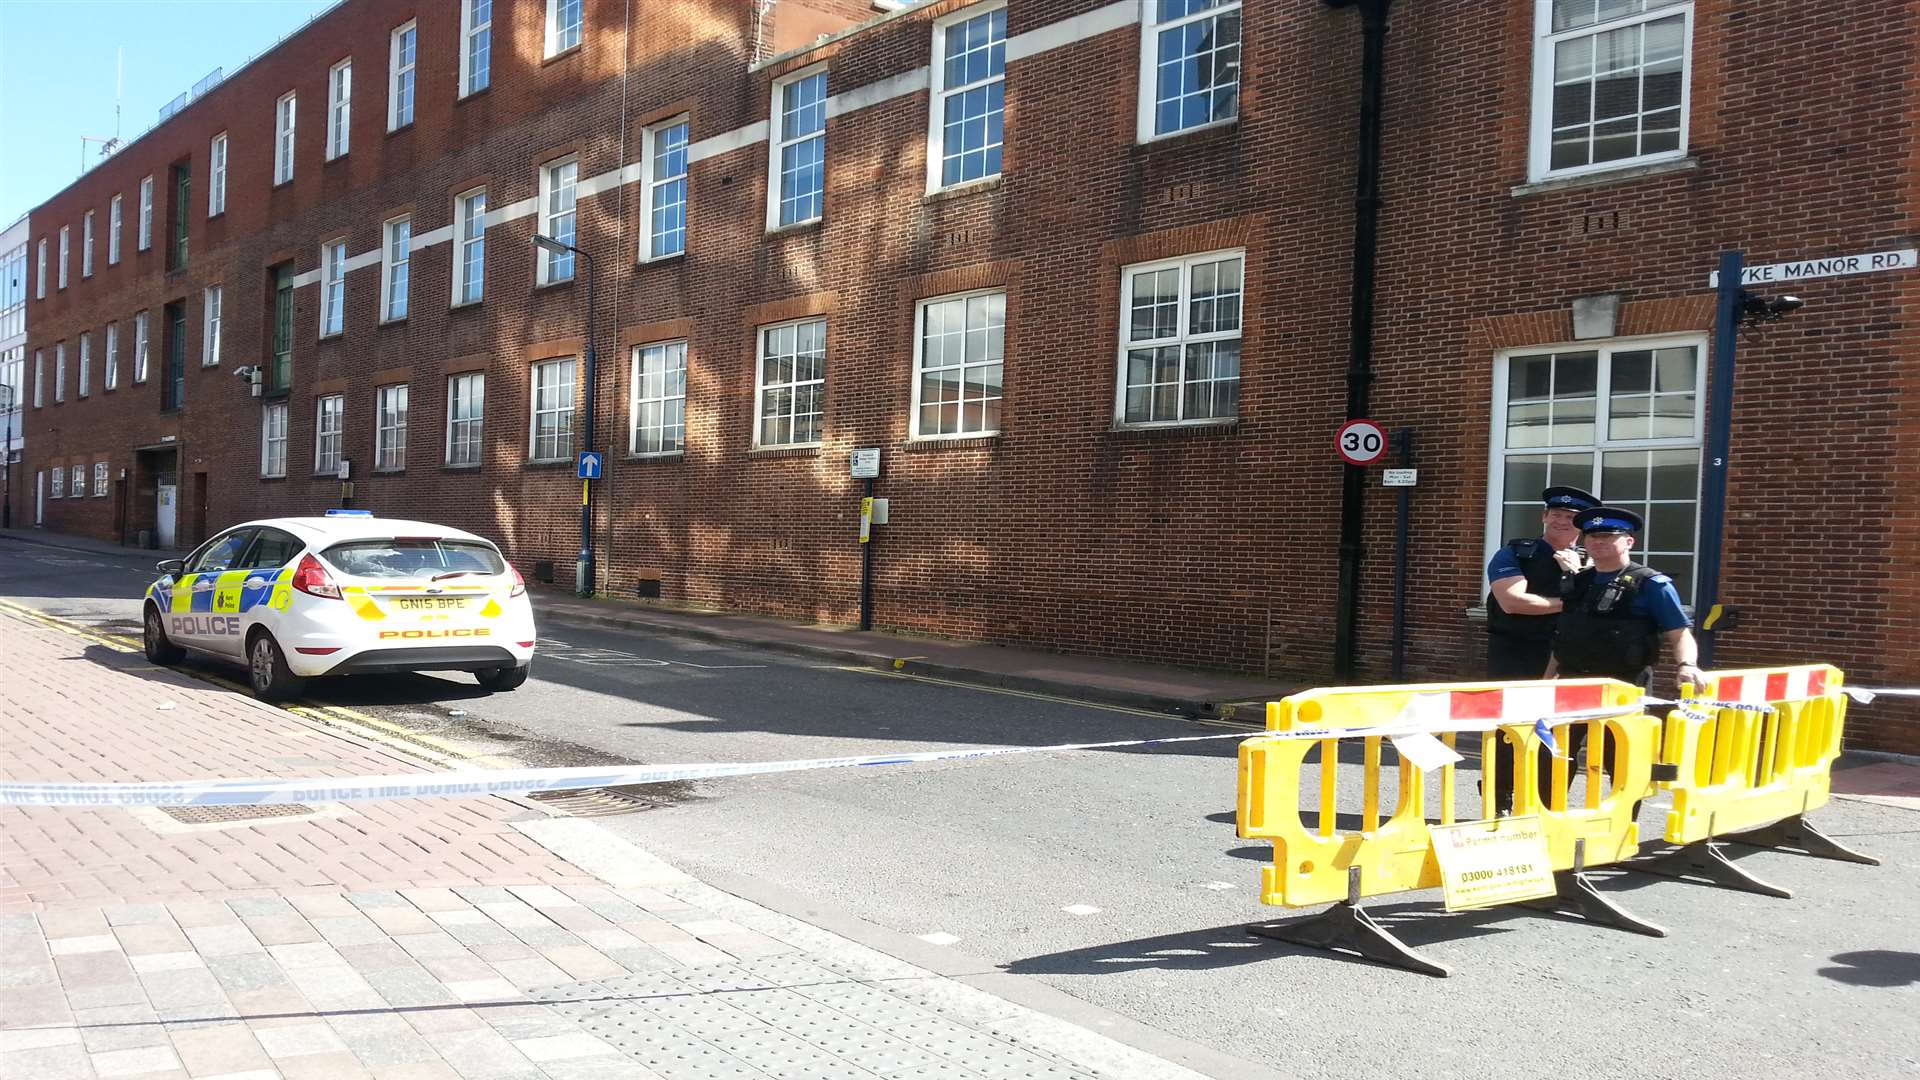 Wyke Manor Road next to Caffe Nero was initially closed, but has now been reopened